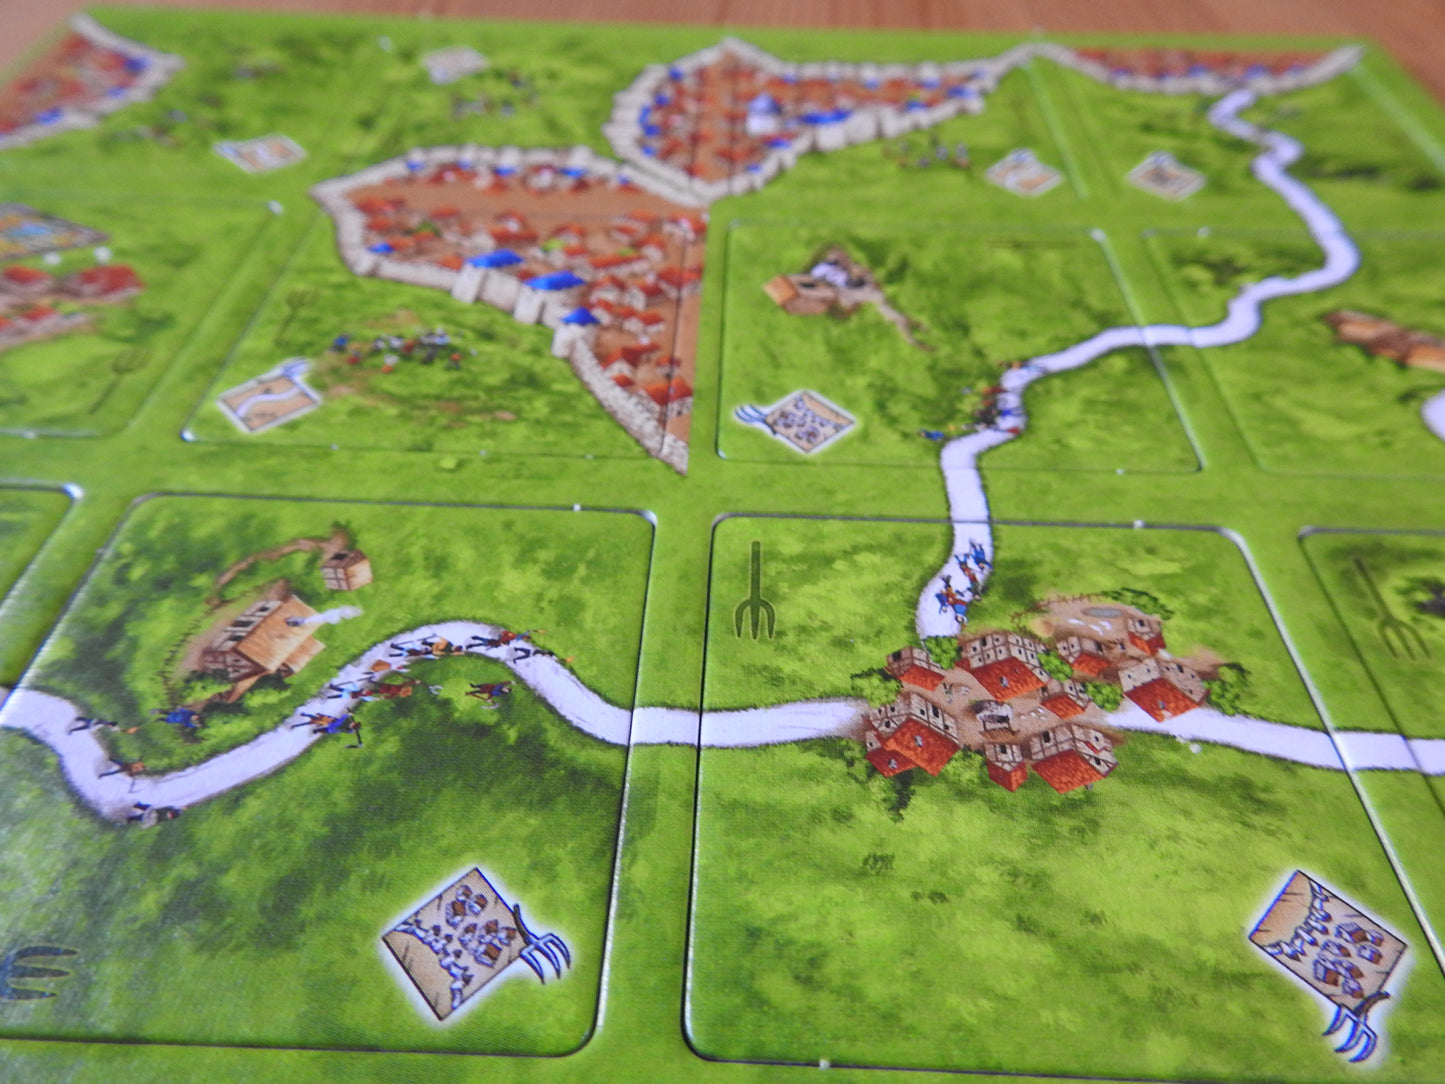 Close-up view of some of the included titles, including the local citizenry uprising in this Peasant Revolts mini expansion for Carcassonne.